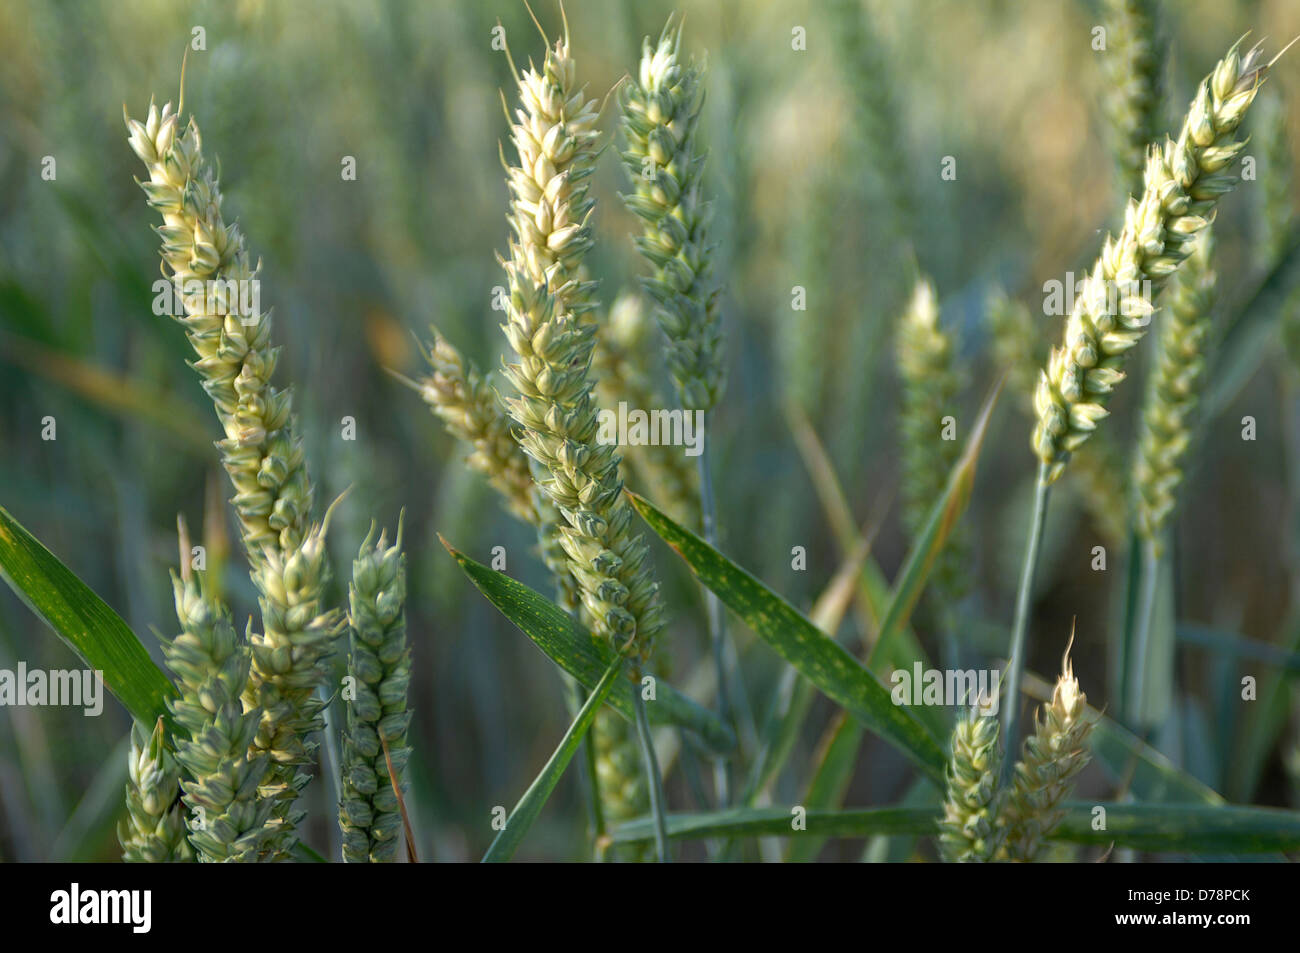 England, West Sussex, Henfield, Ears of Wheat growing in field. Stock Photo